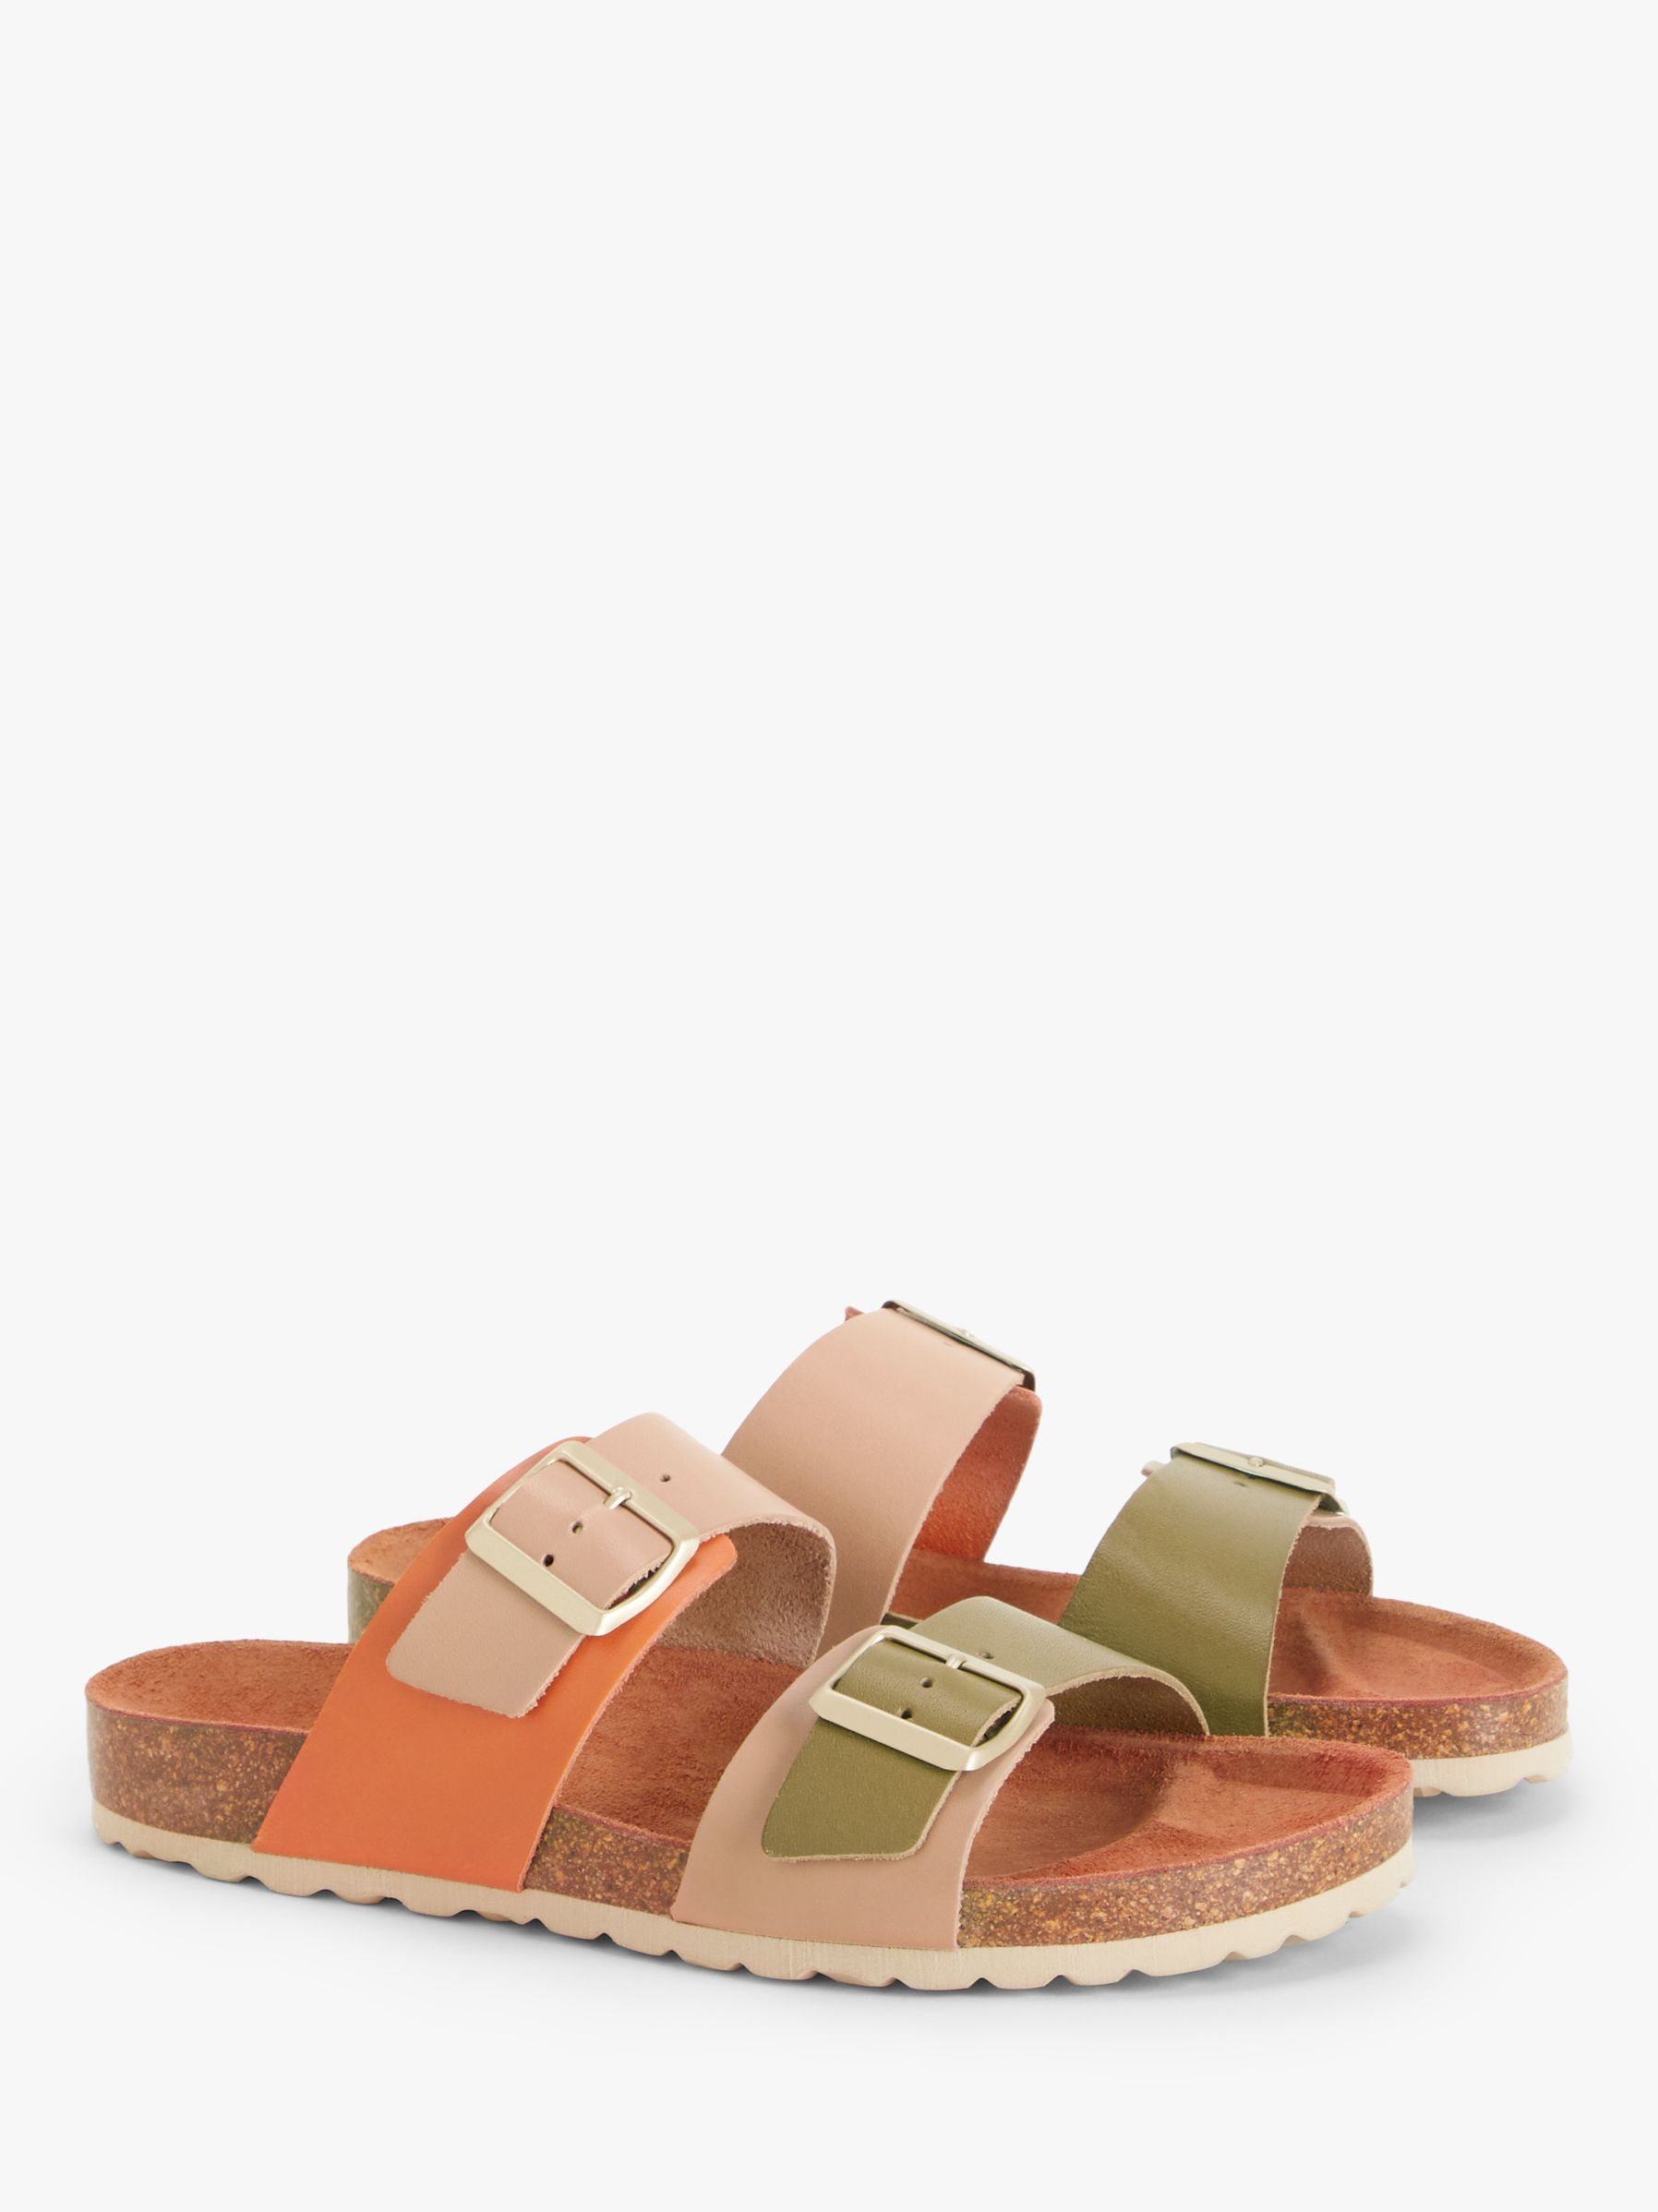 John Lewis Lolly Leather Sandals, Beige/Multi, 8